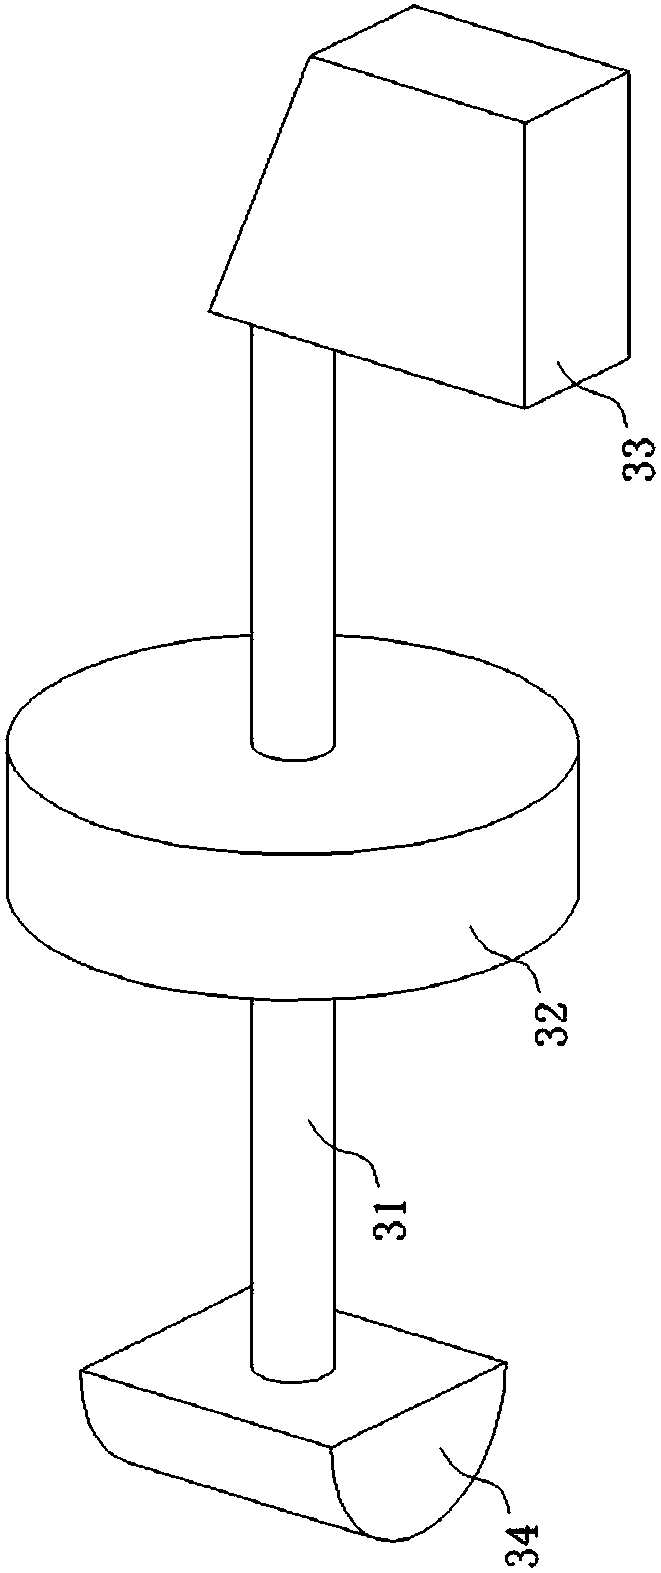 A spindle bar device for holding a textile bobbin